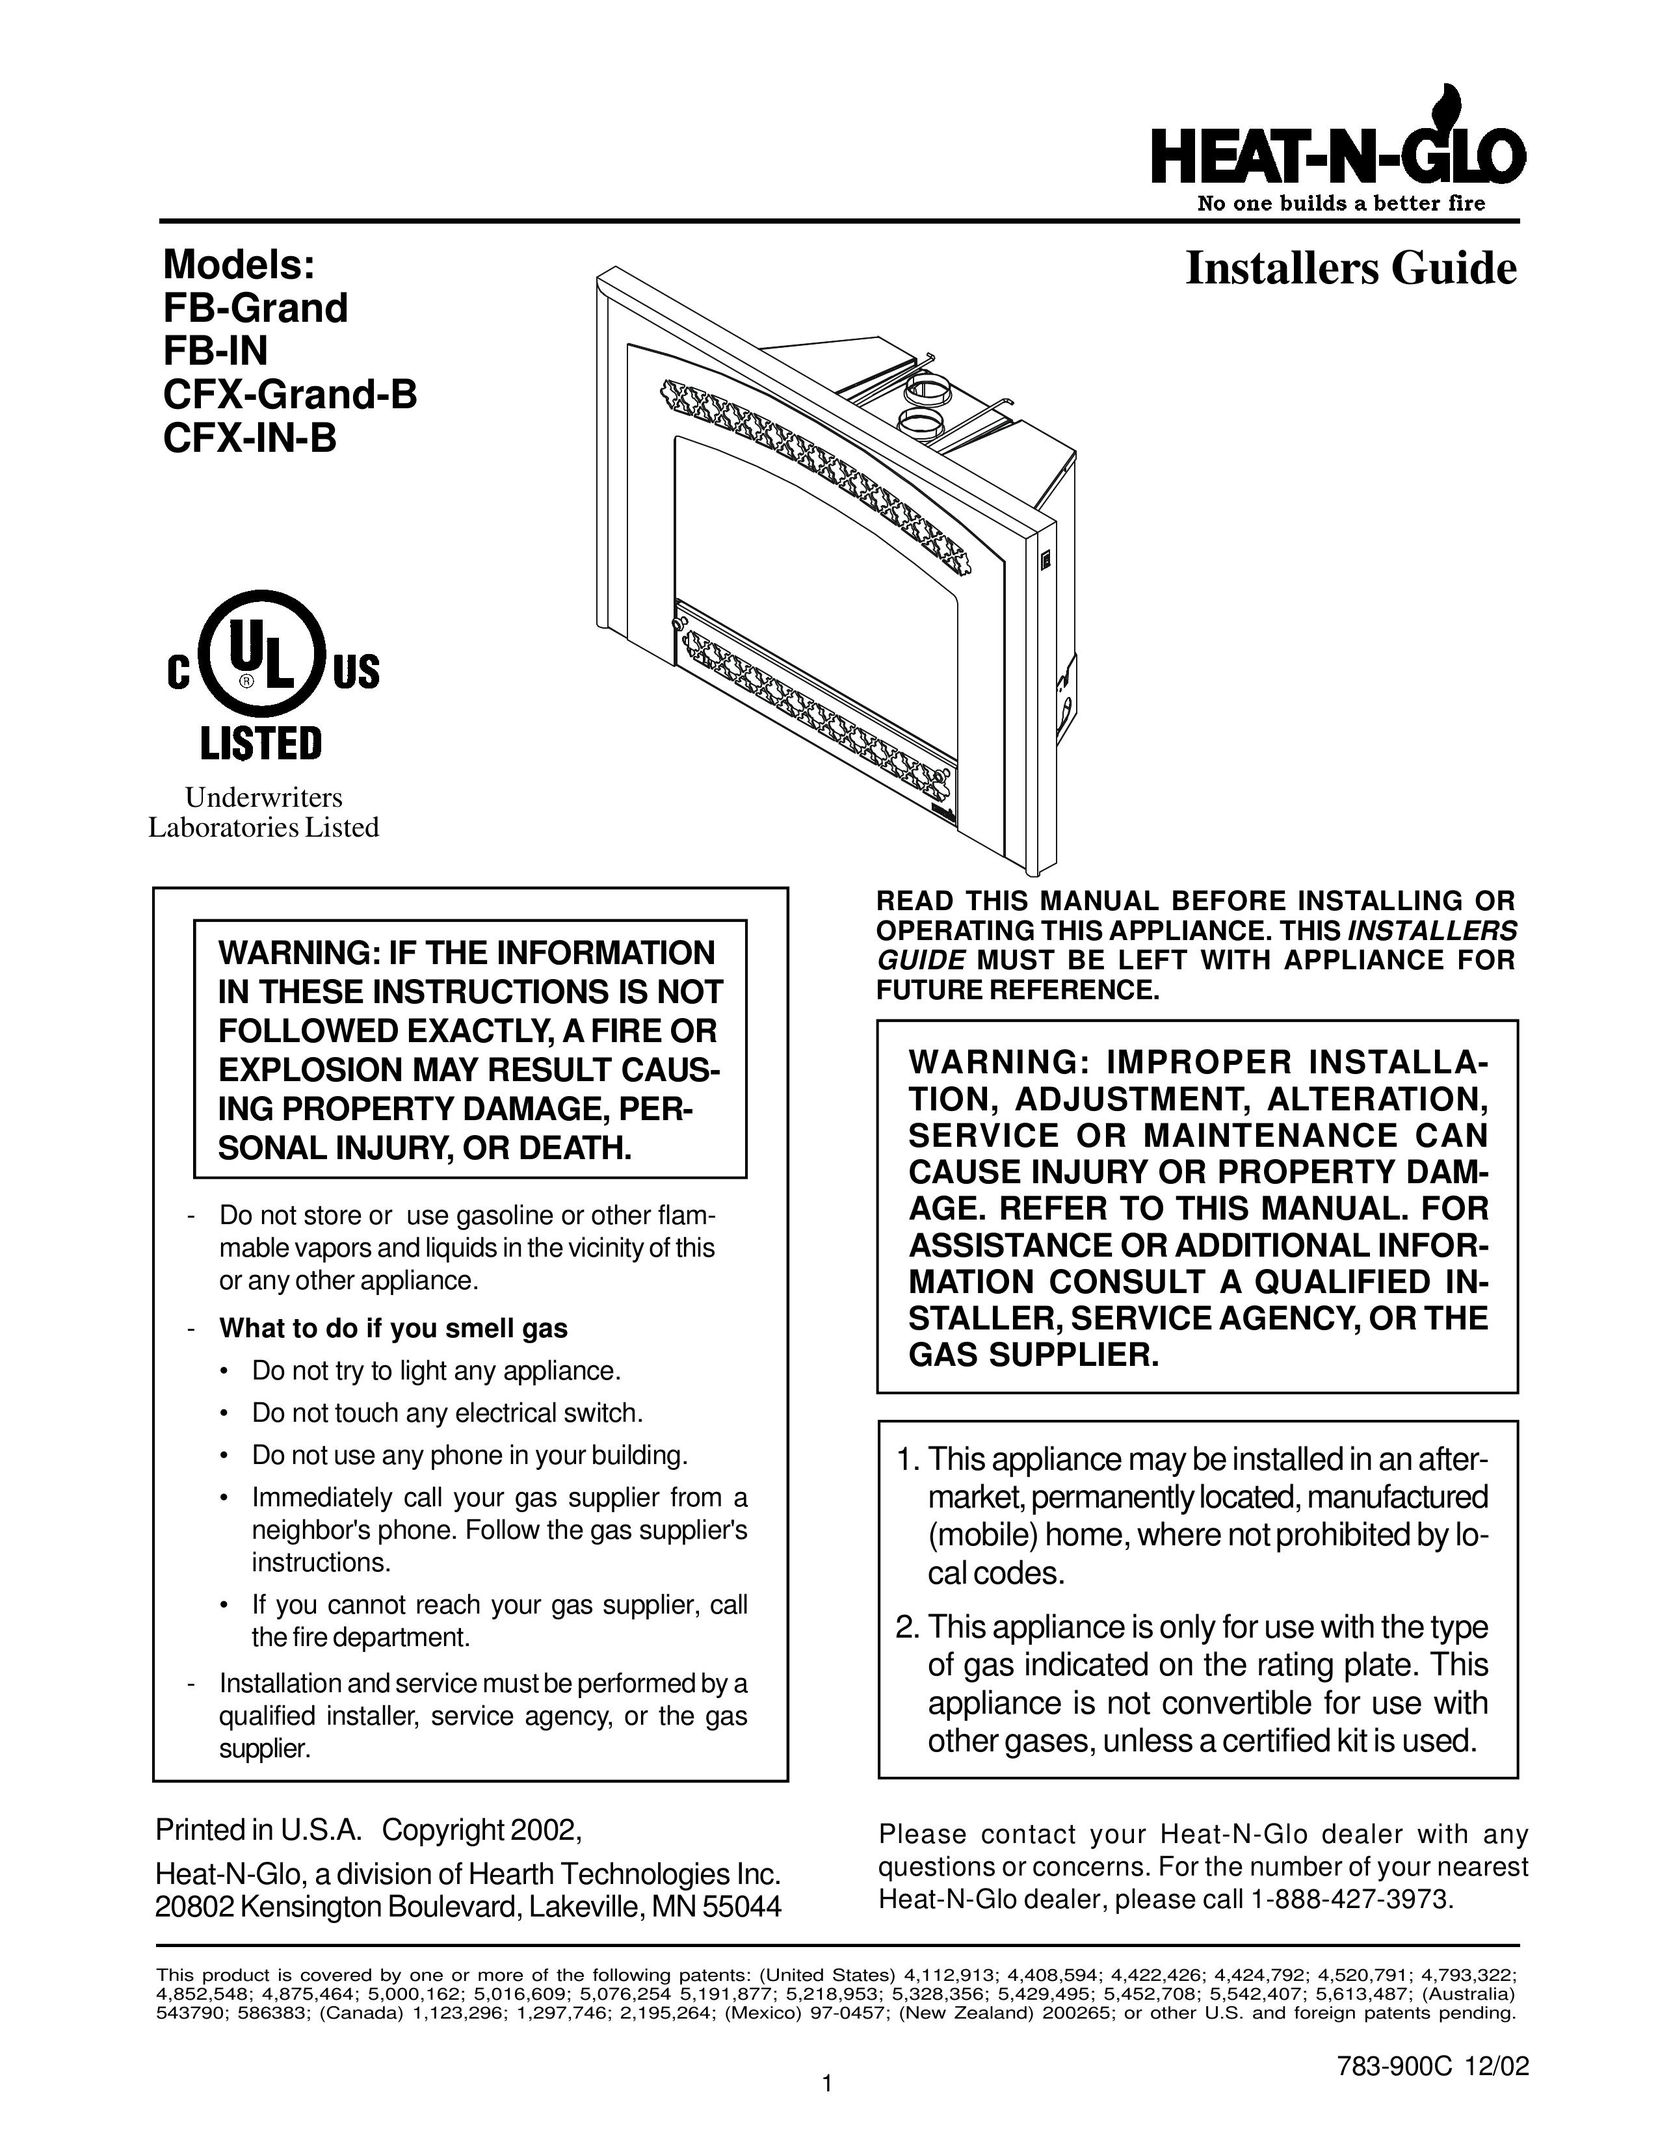 Heat & Glo LifeStyle FB-IN Stove User Manual